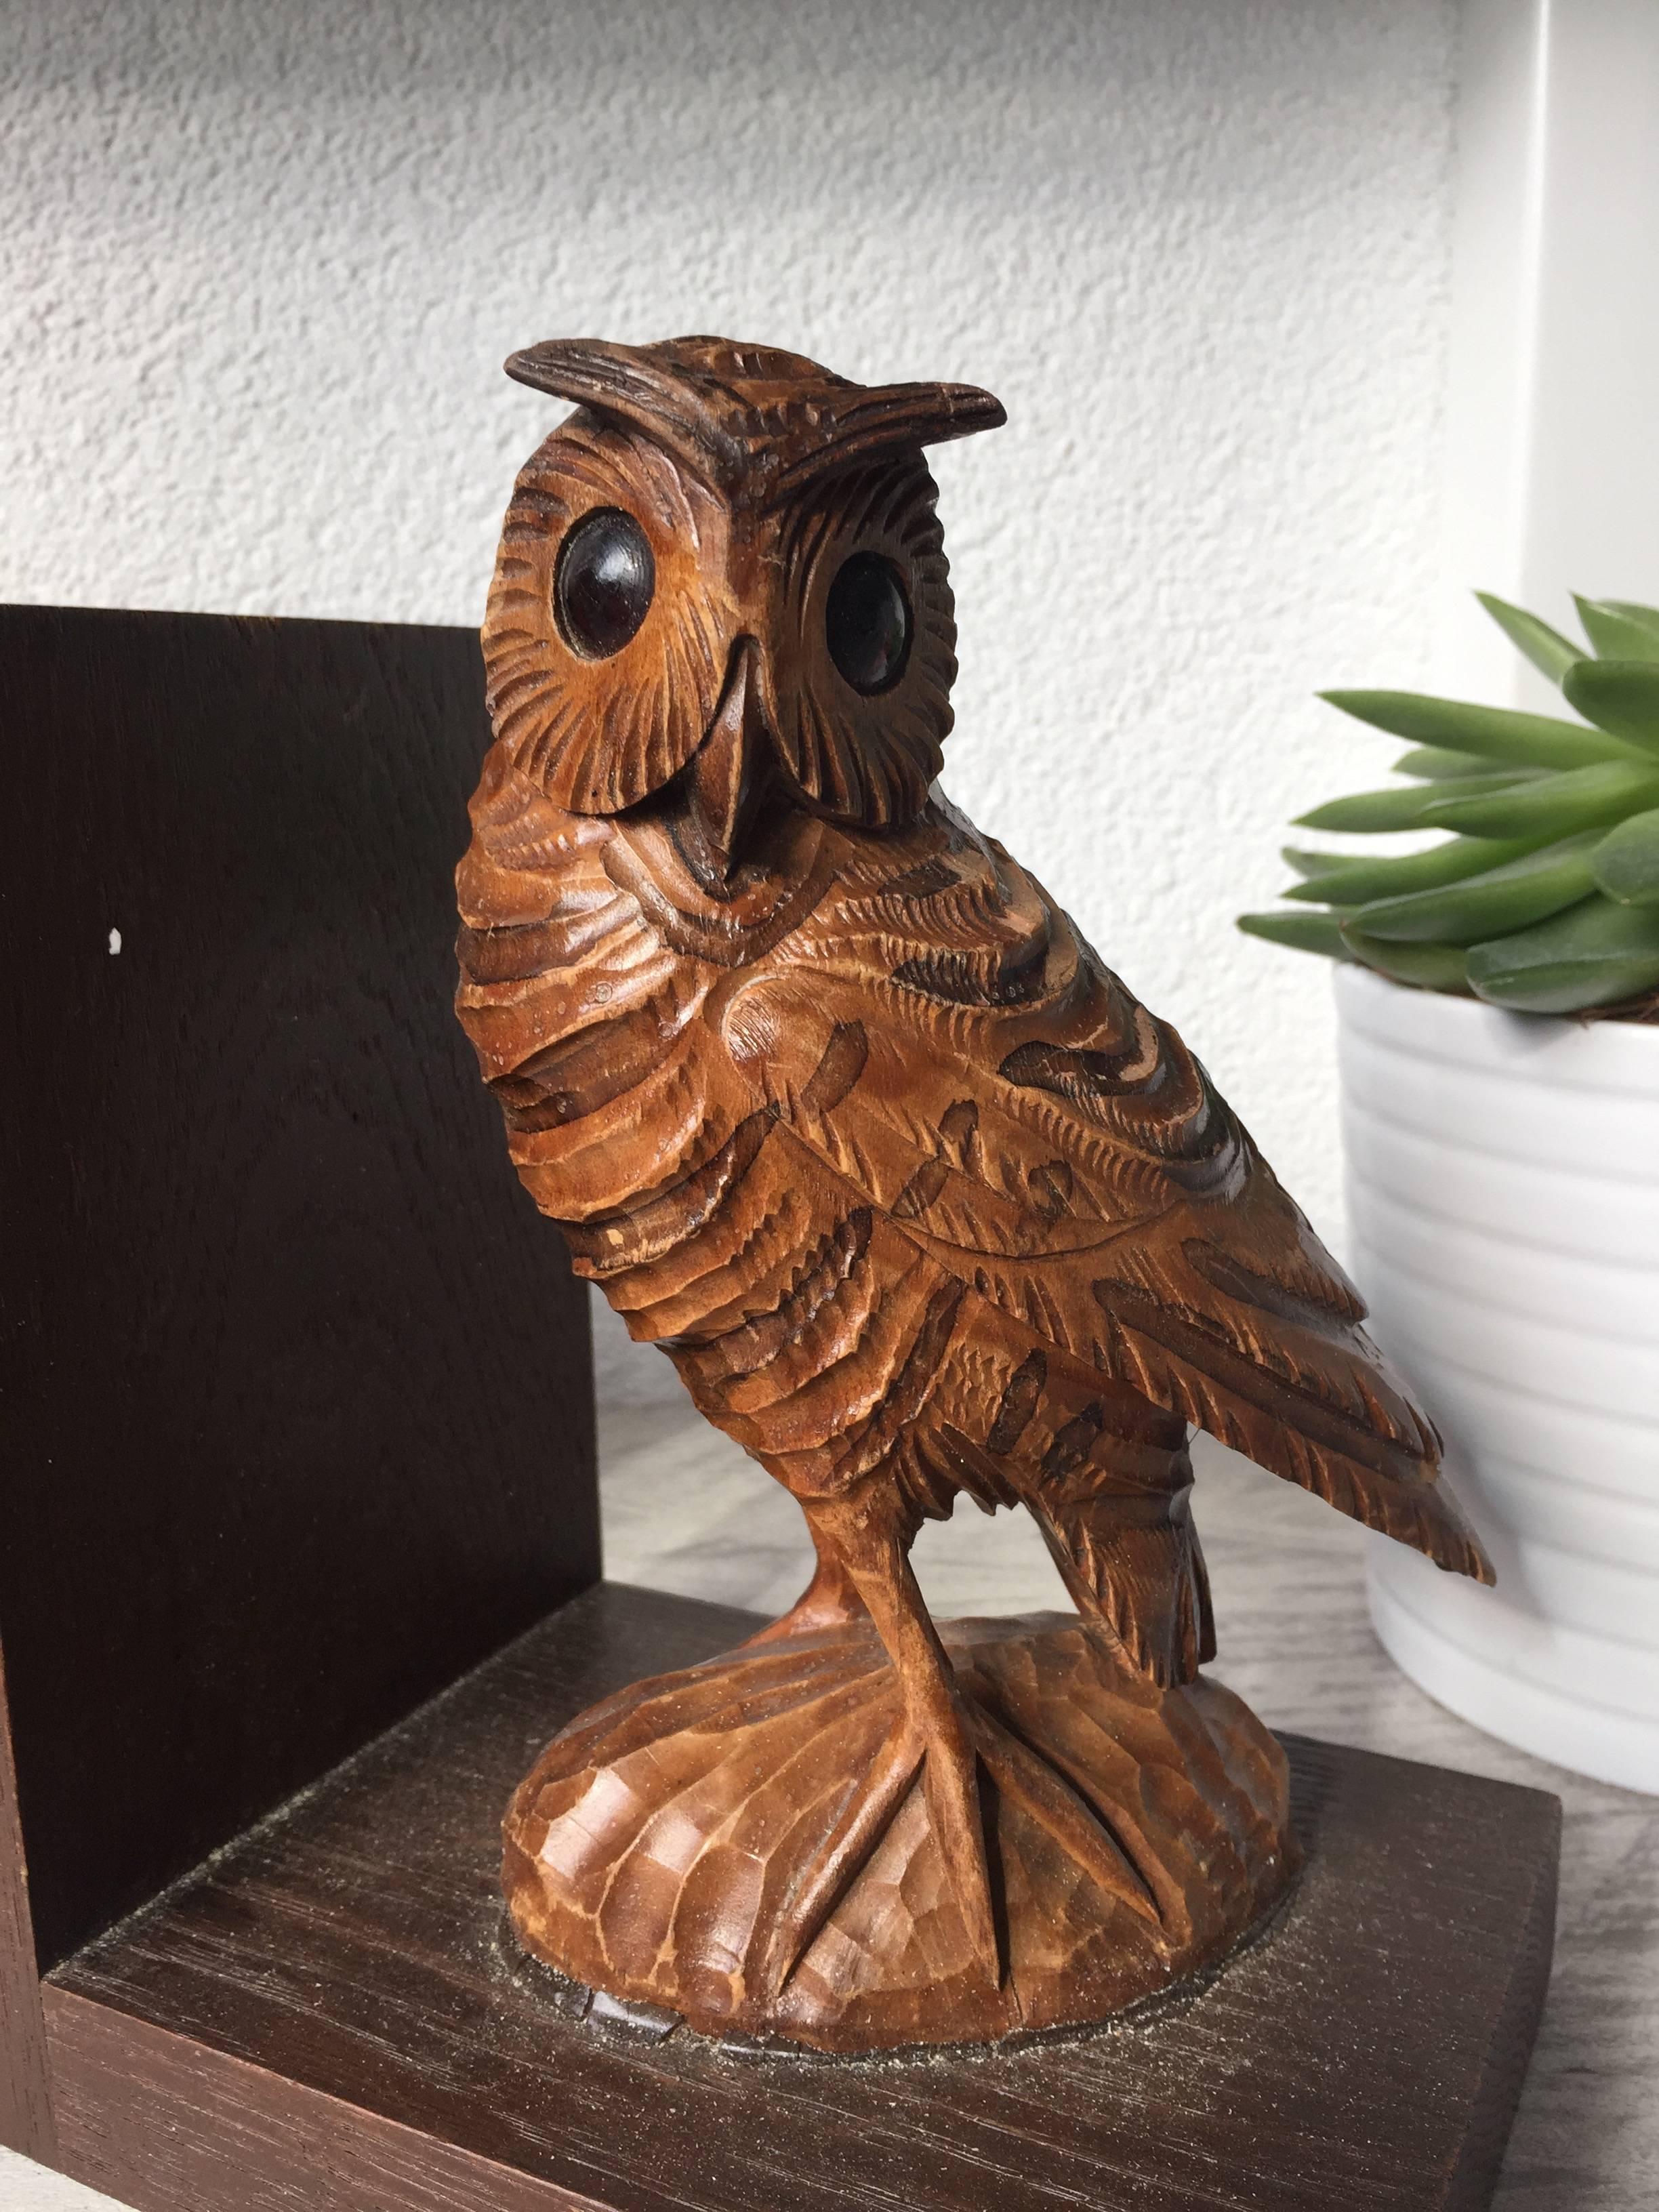 Rare and quality carved standing owl bookstands.

Given the fact that owls are the international symbol for wisdom and learning, they are the perfect sculptures on a pair of bookends. These good size, hand-sculpted owls are beautiful in size, shape